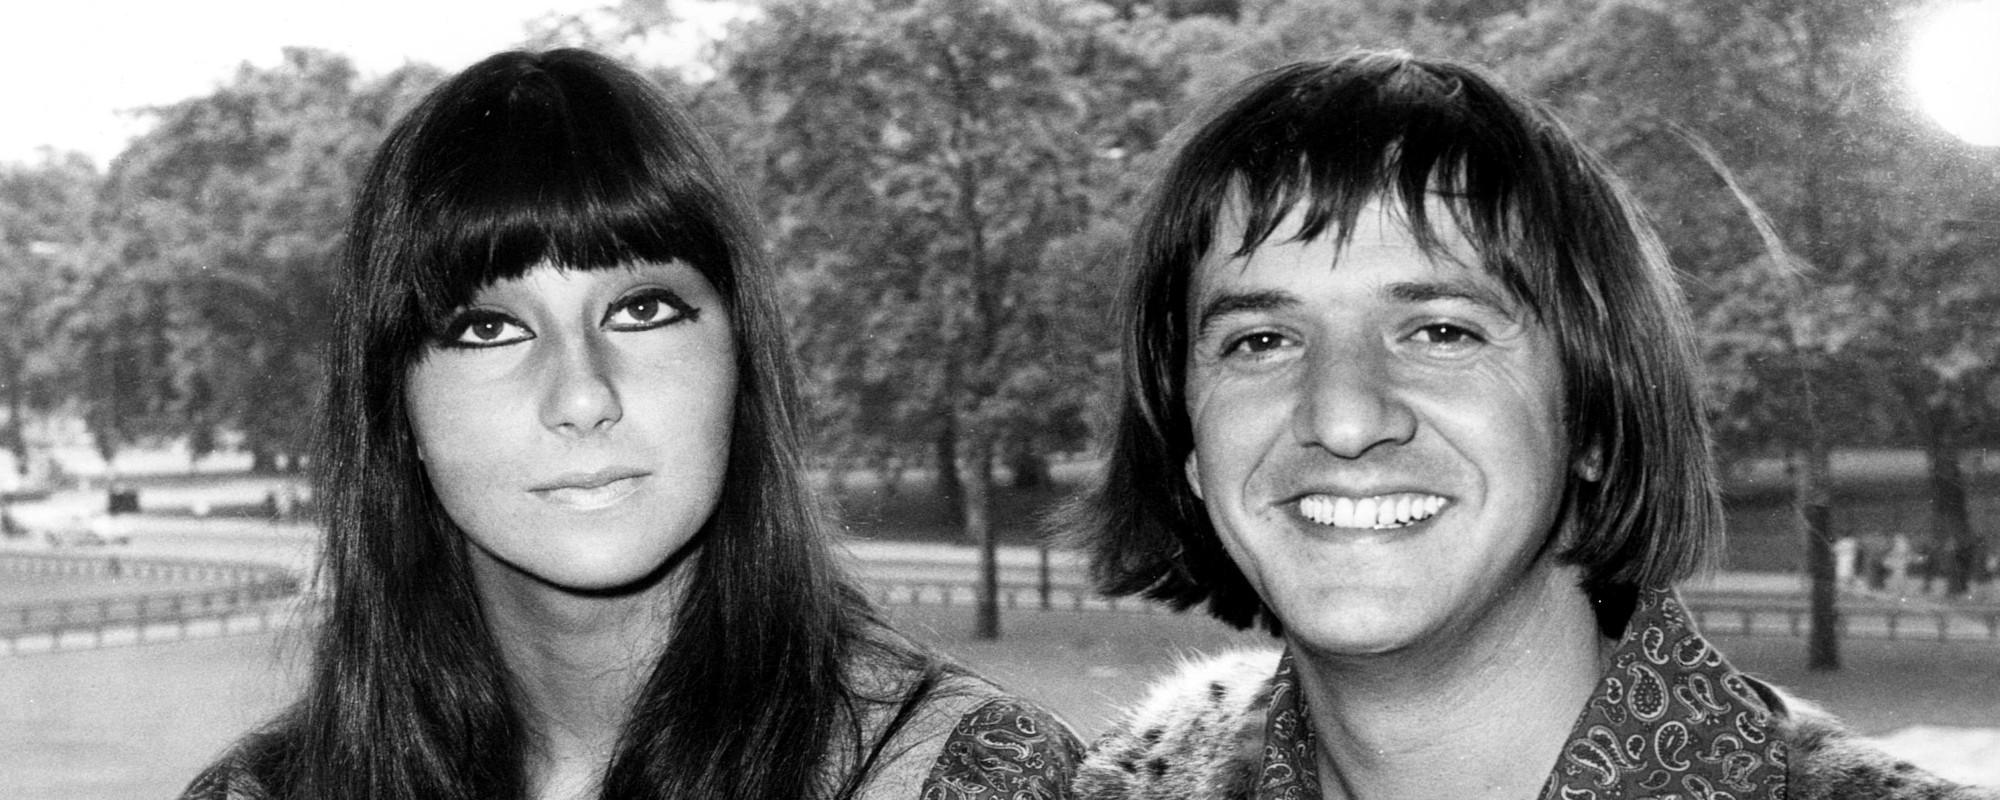 The Meaning Behind “The Beat Goes On” by Sonny & Cher and Why It Stands as a Piece of Sly Pop Commentary